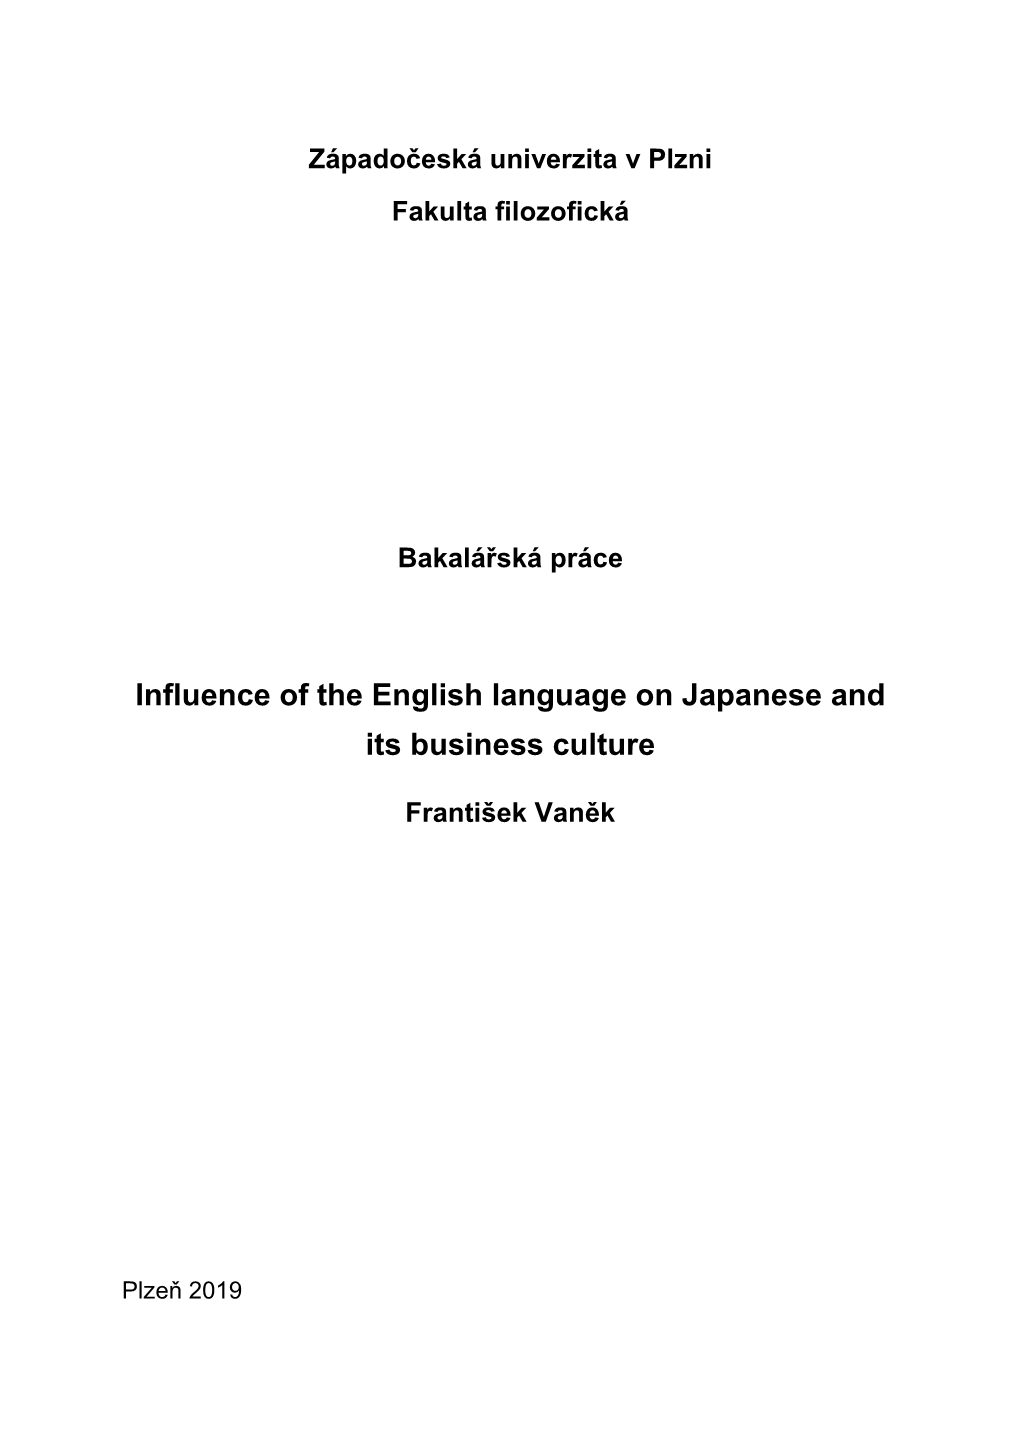 Influence of the English Language on Japanese and Its Business Culture